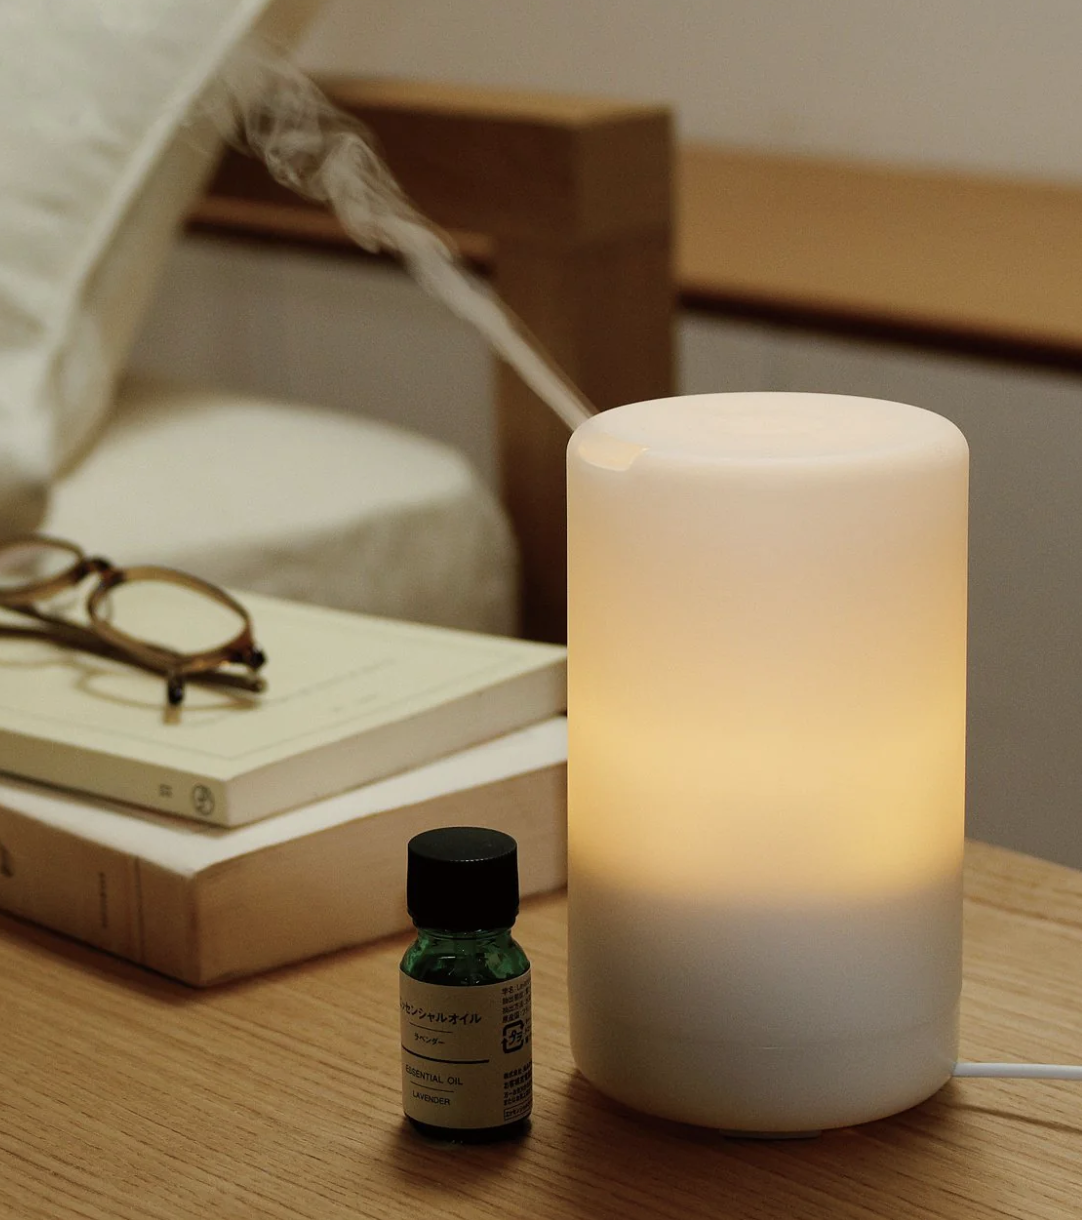 A diffuser on a bedside table